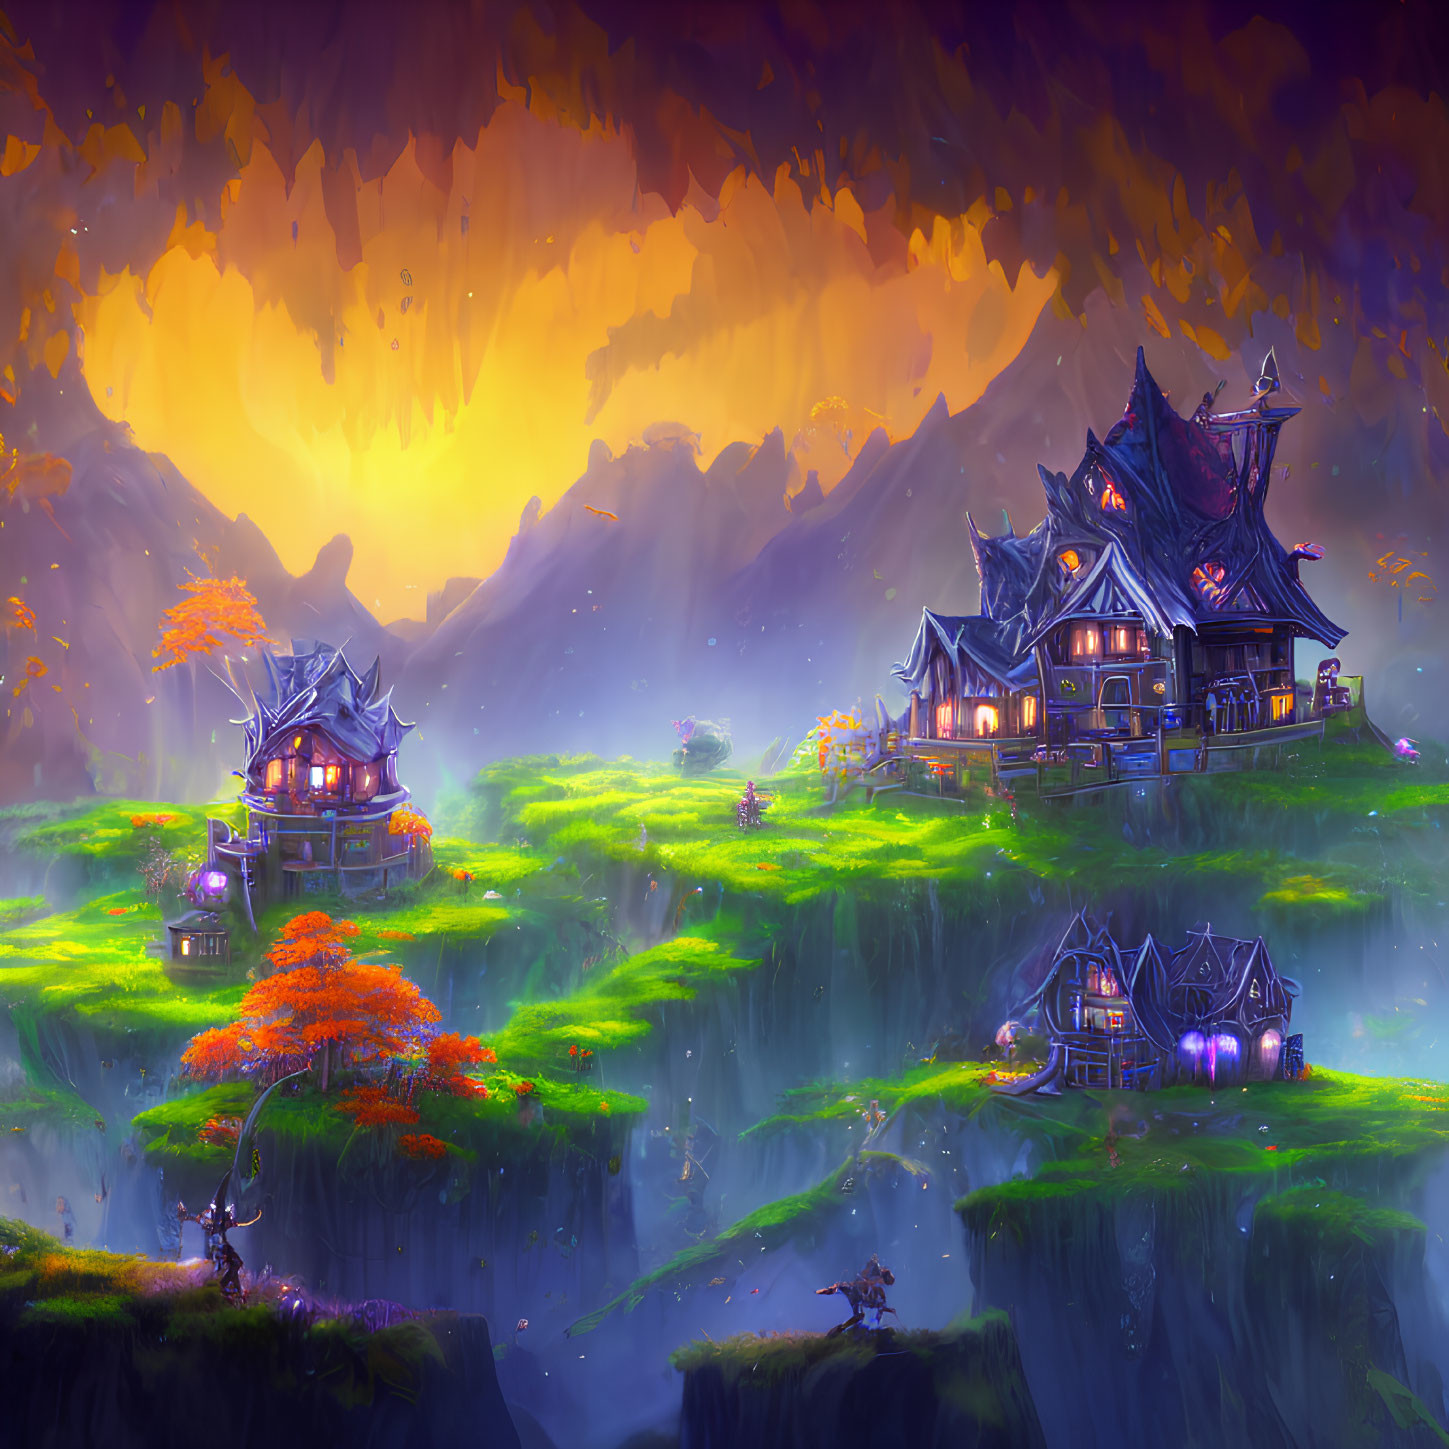 Colorful fantasy landscape with floating islands and traditional houses under orange sky